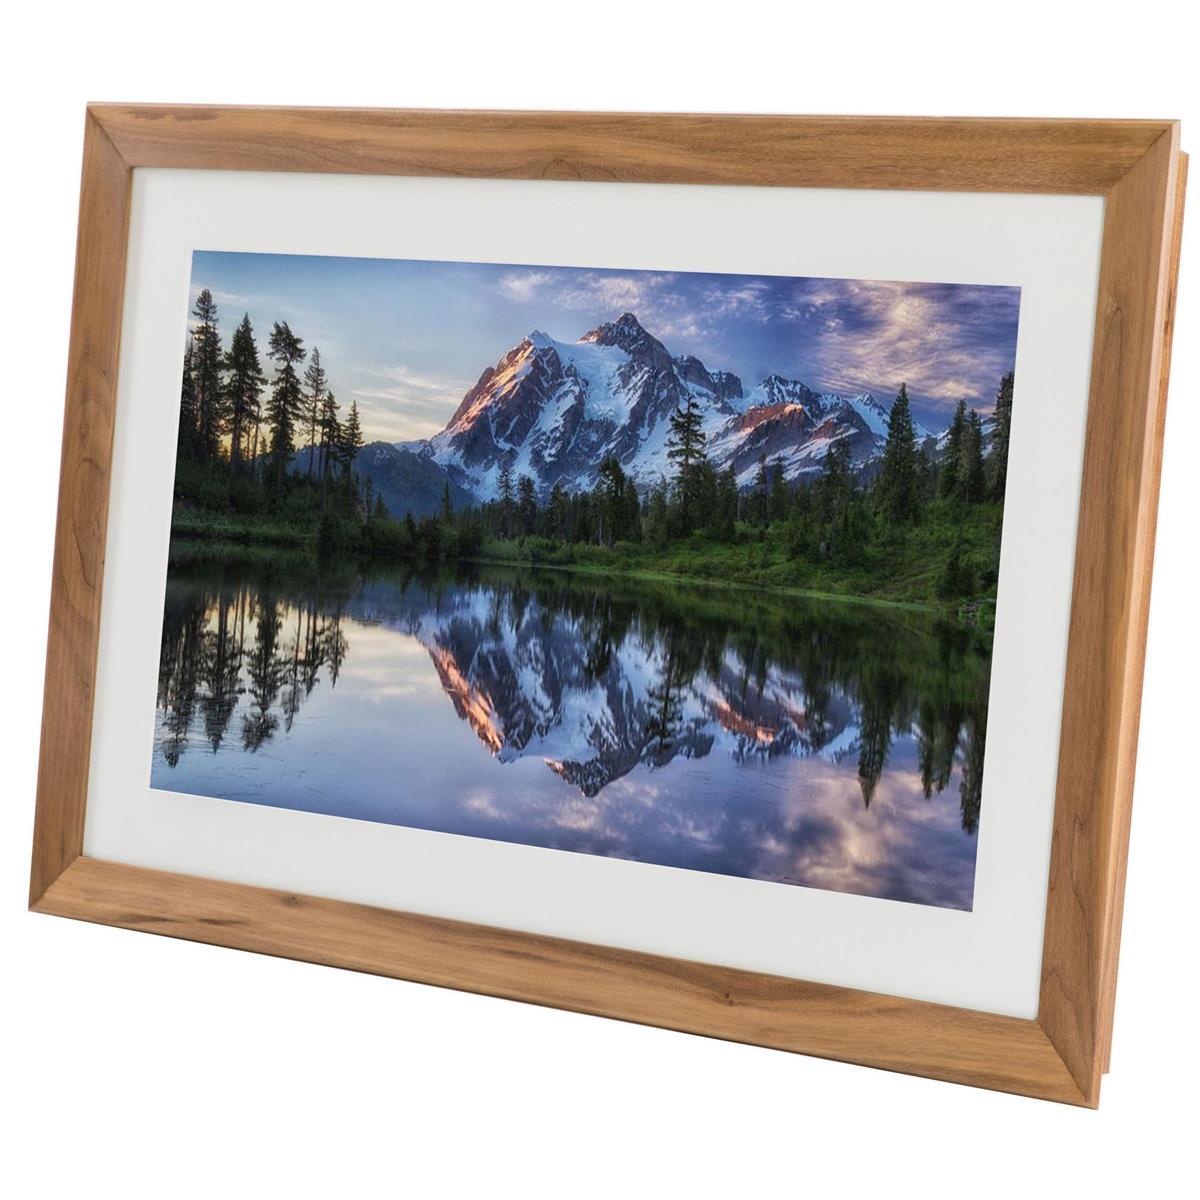 27in Meural Canvas Leonora LCD WiFi Digital Photo Frame for $299.95 Shipped